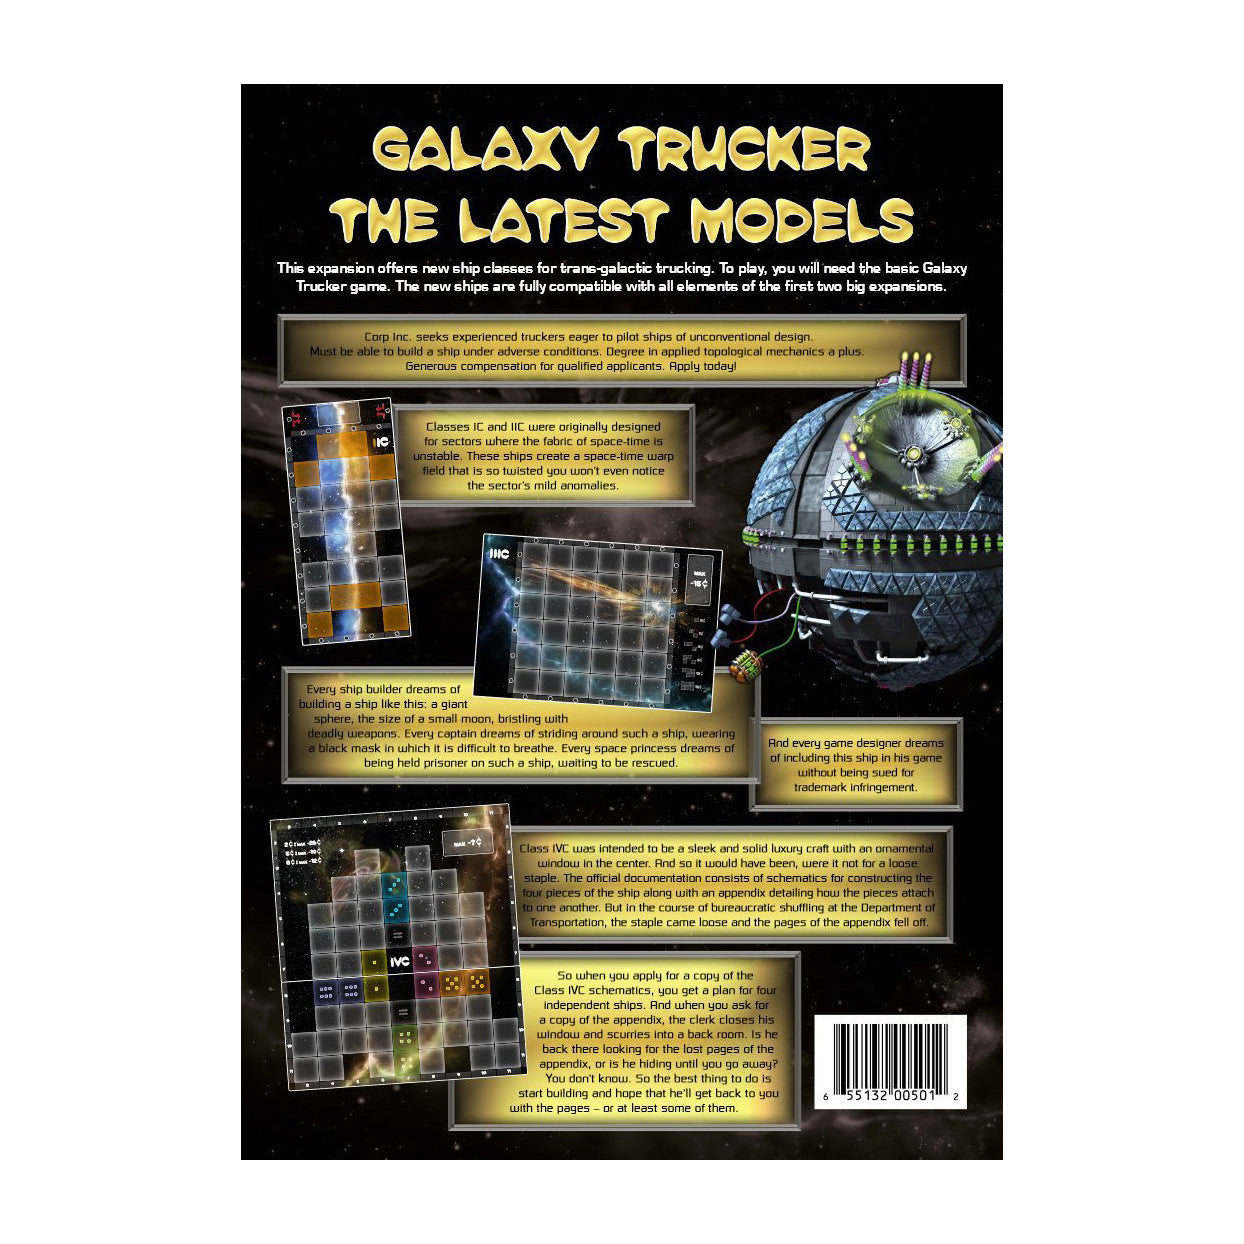 Galaxy Trucker: Latest Models / expansion